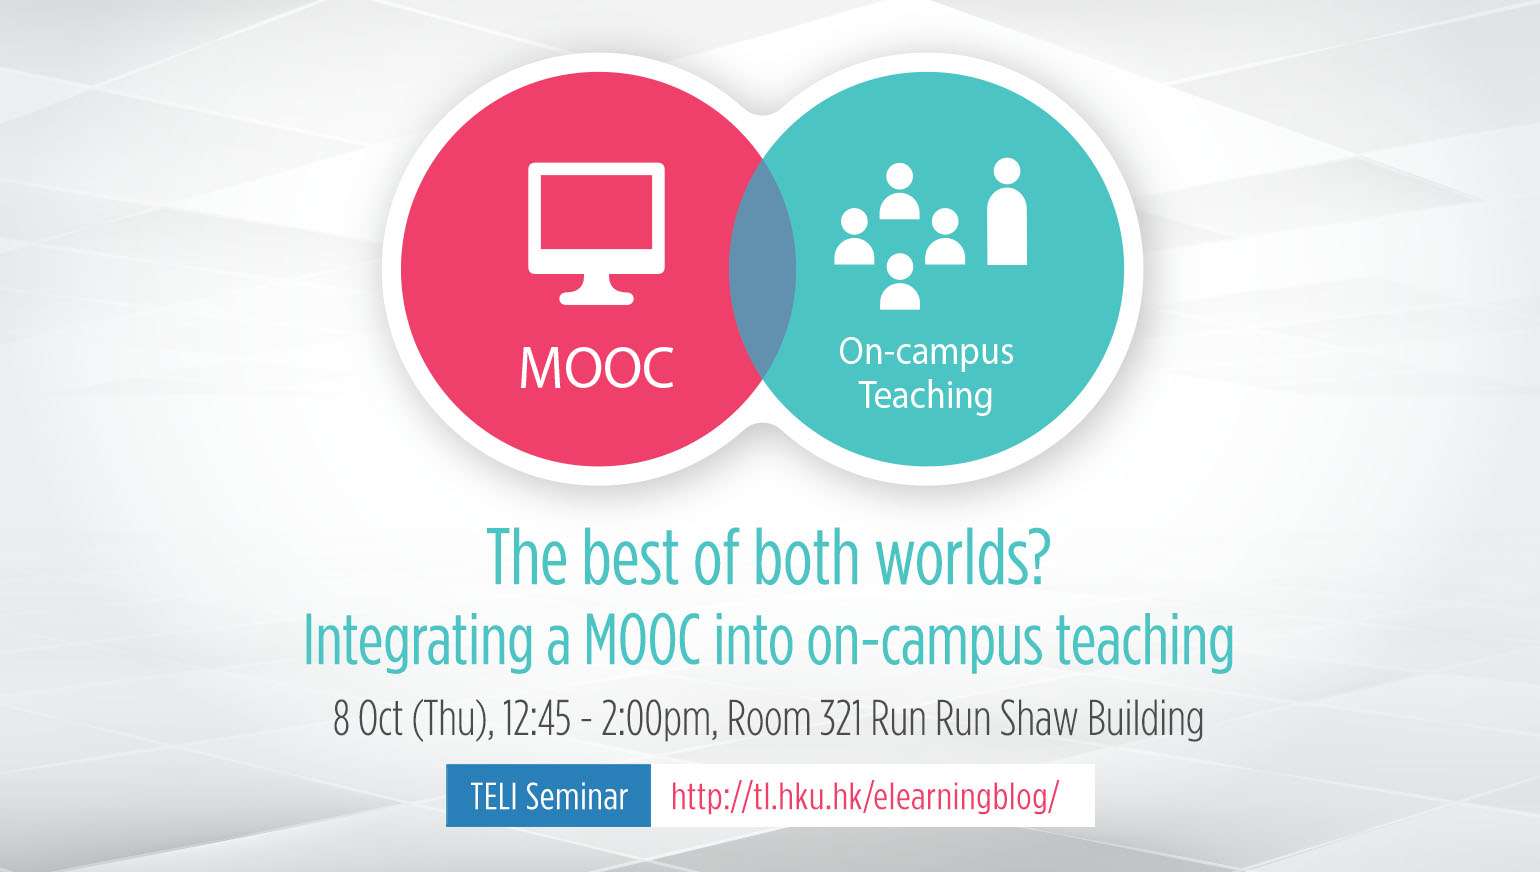 The best of both worlds? Integrating a MOOC into on-campus teaching